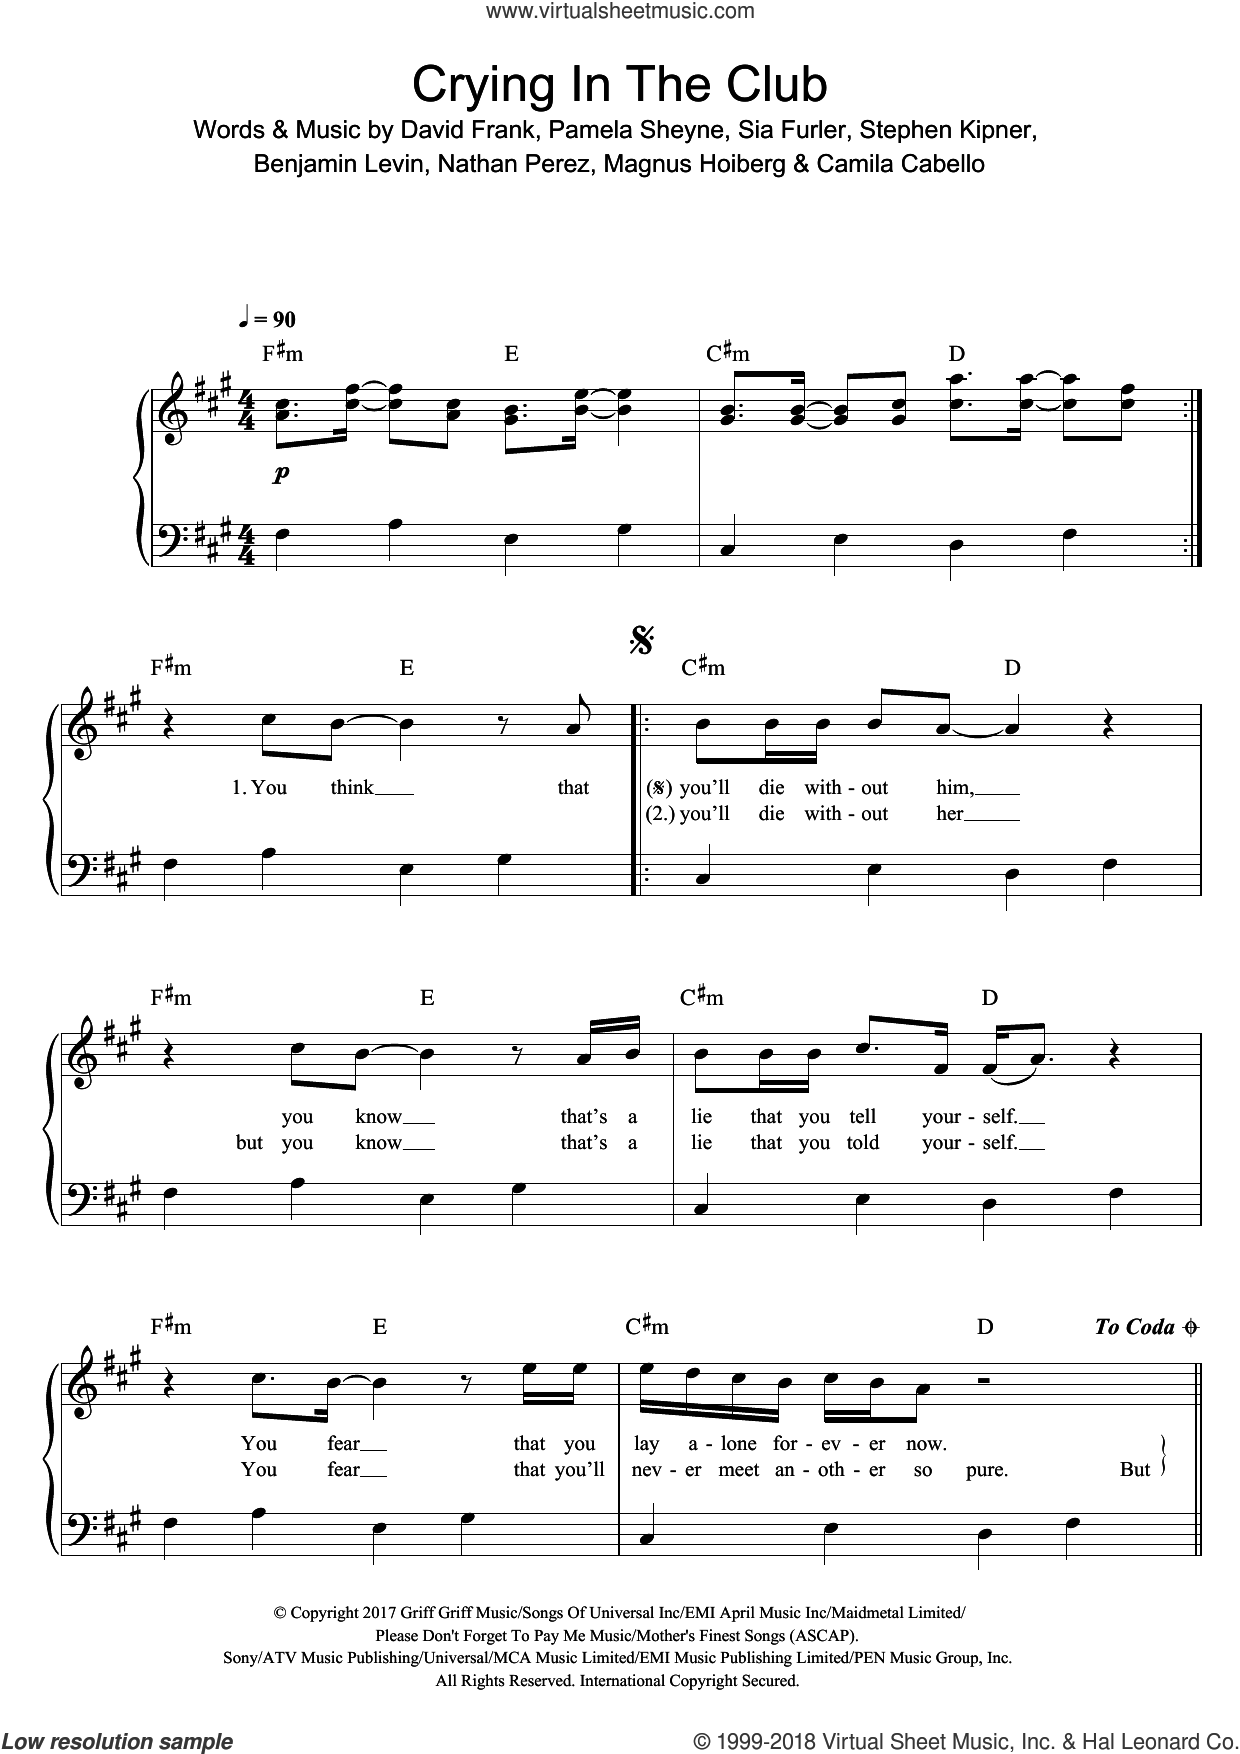 Crying In The Club sheet music for piano solo (PDF-interactive)